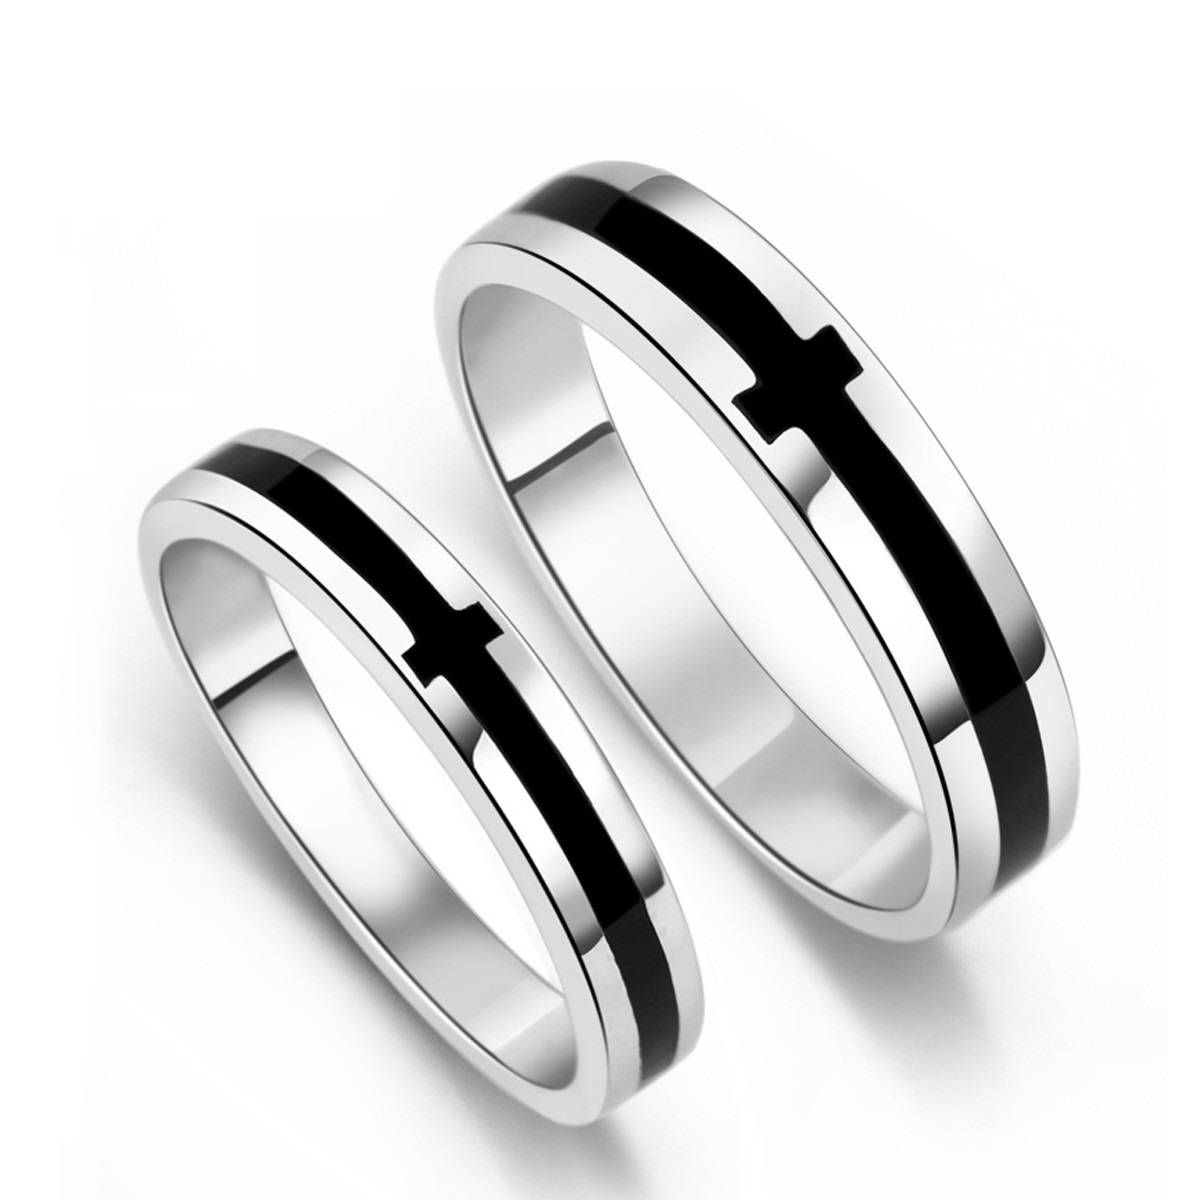 Black Onyx S925 Sterling Silver Mens Ladies Couple Promise Ring Regarding Sterling Silver Mens Wedding Bands (View 5 of 15)